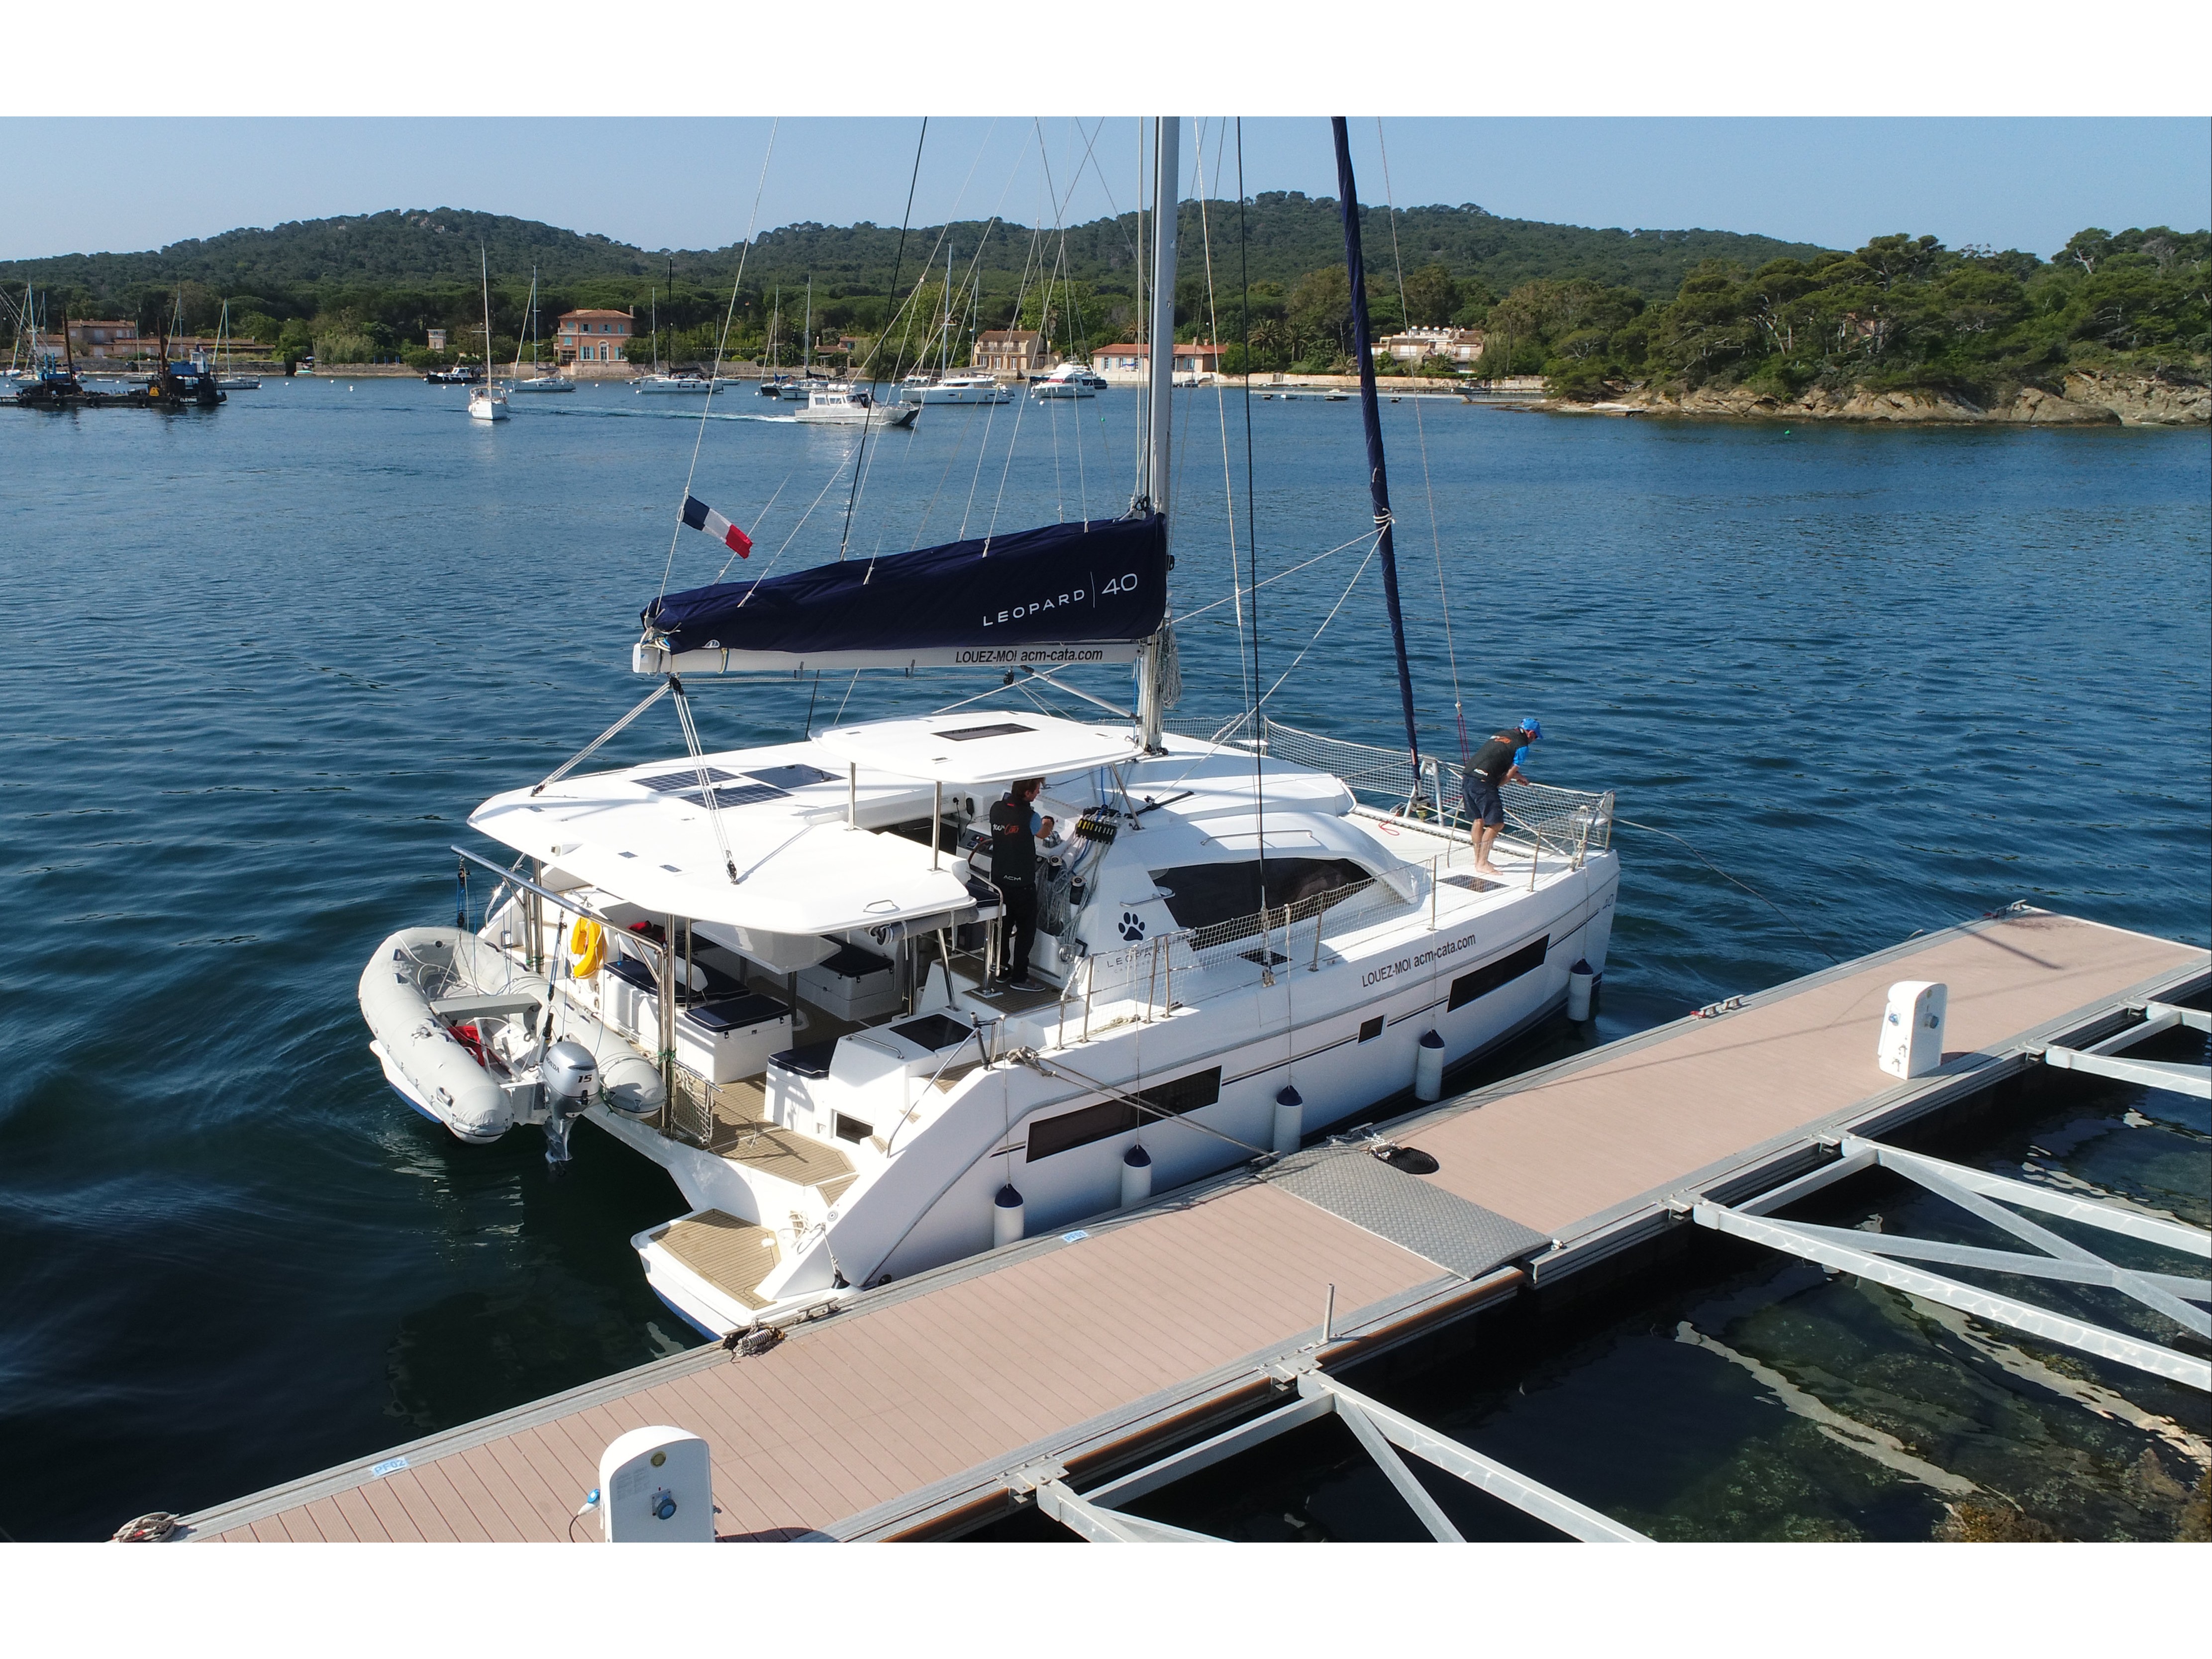 Leopard 40 - Catamaran Charter France & Boat hire in France French Riviera Hyeres Hyeres 3